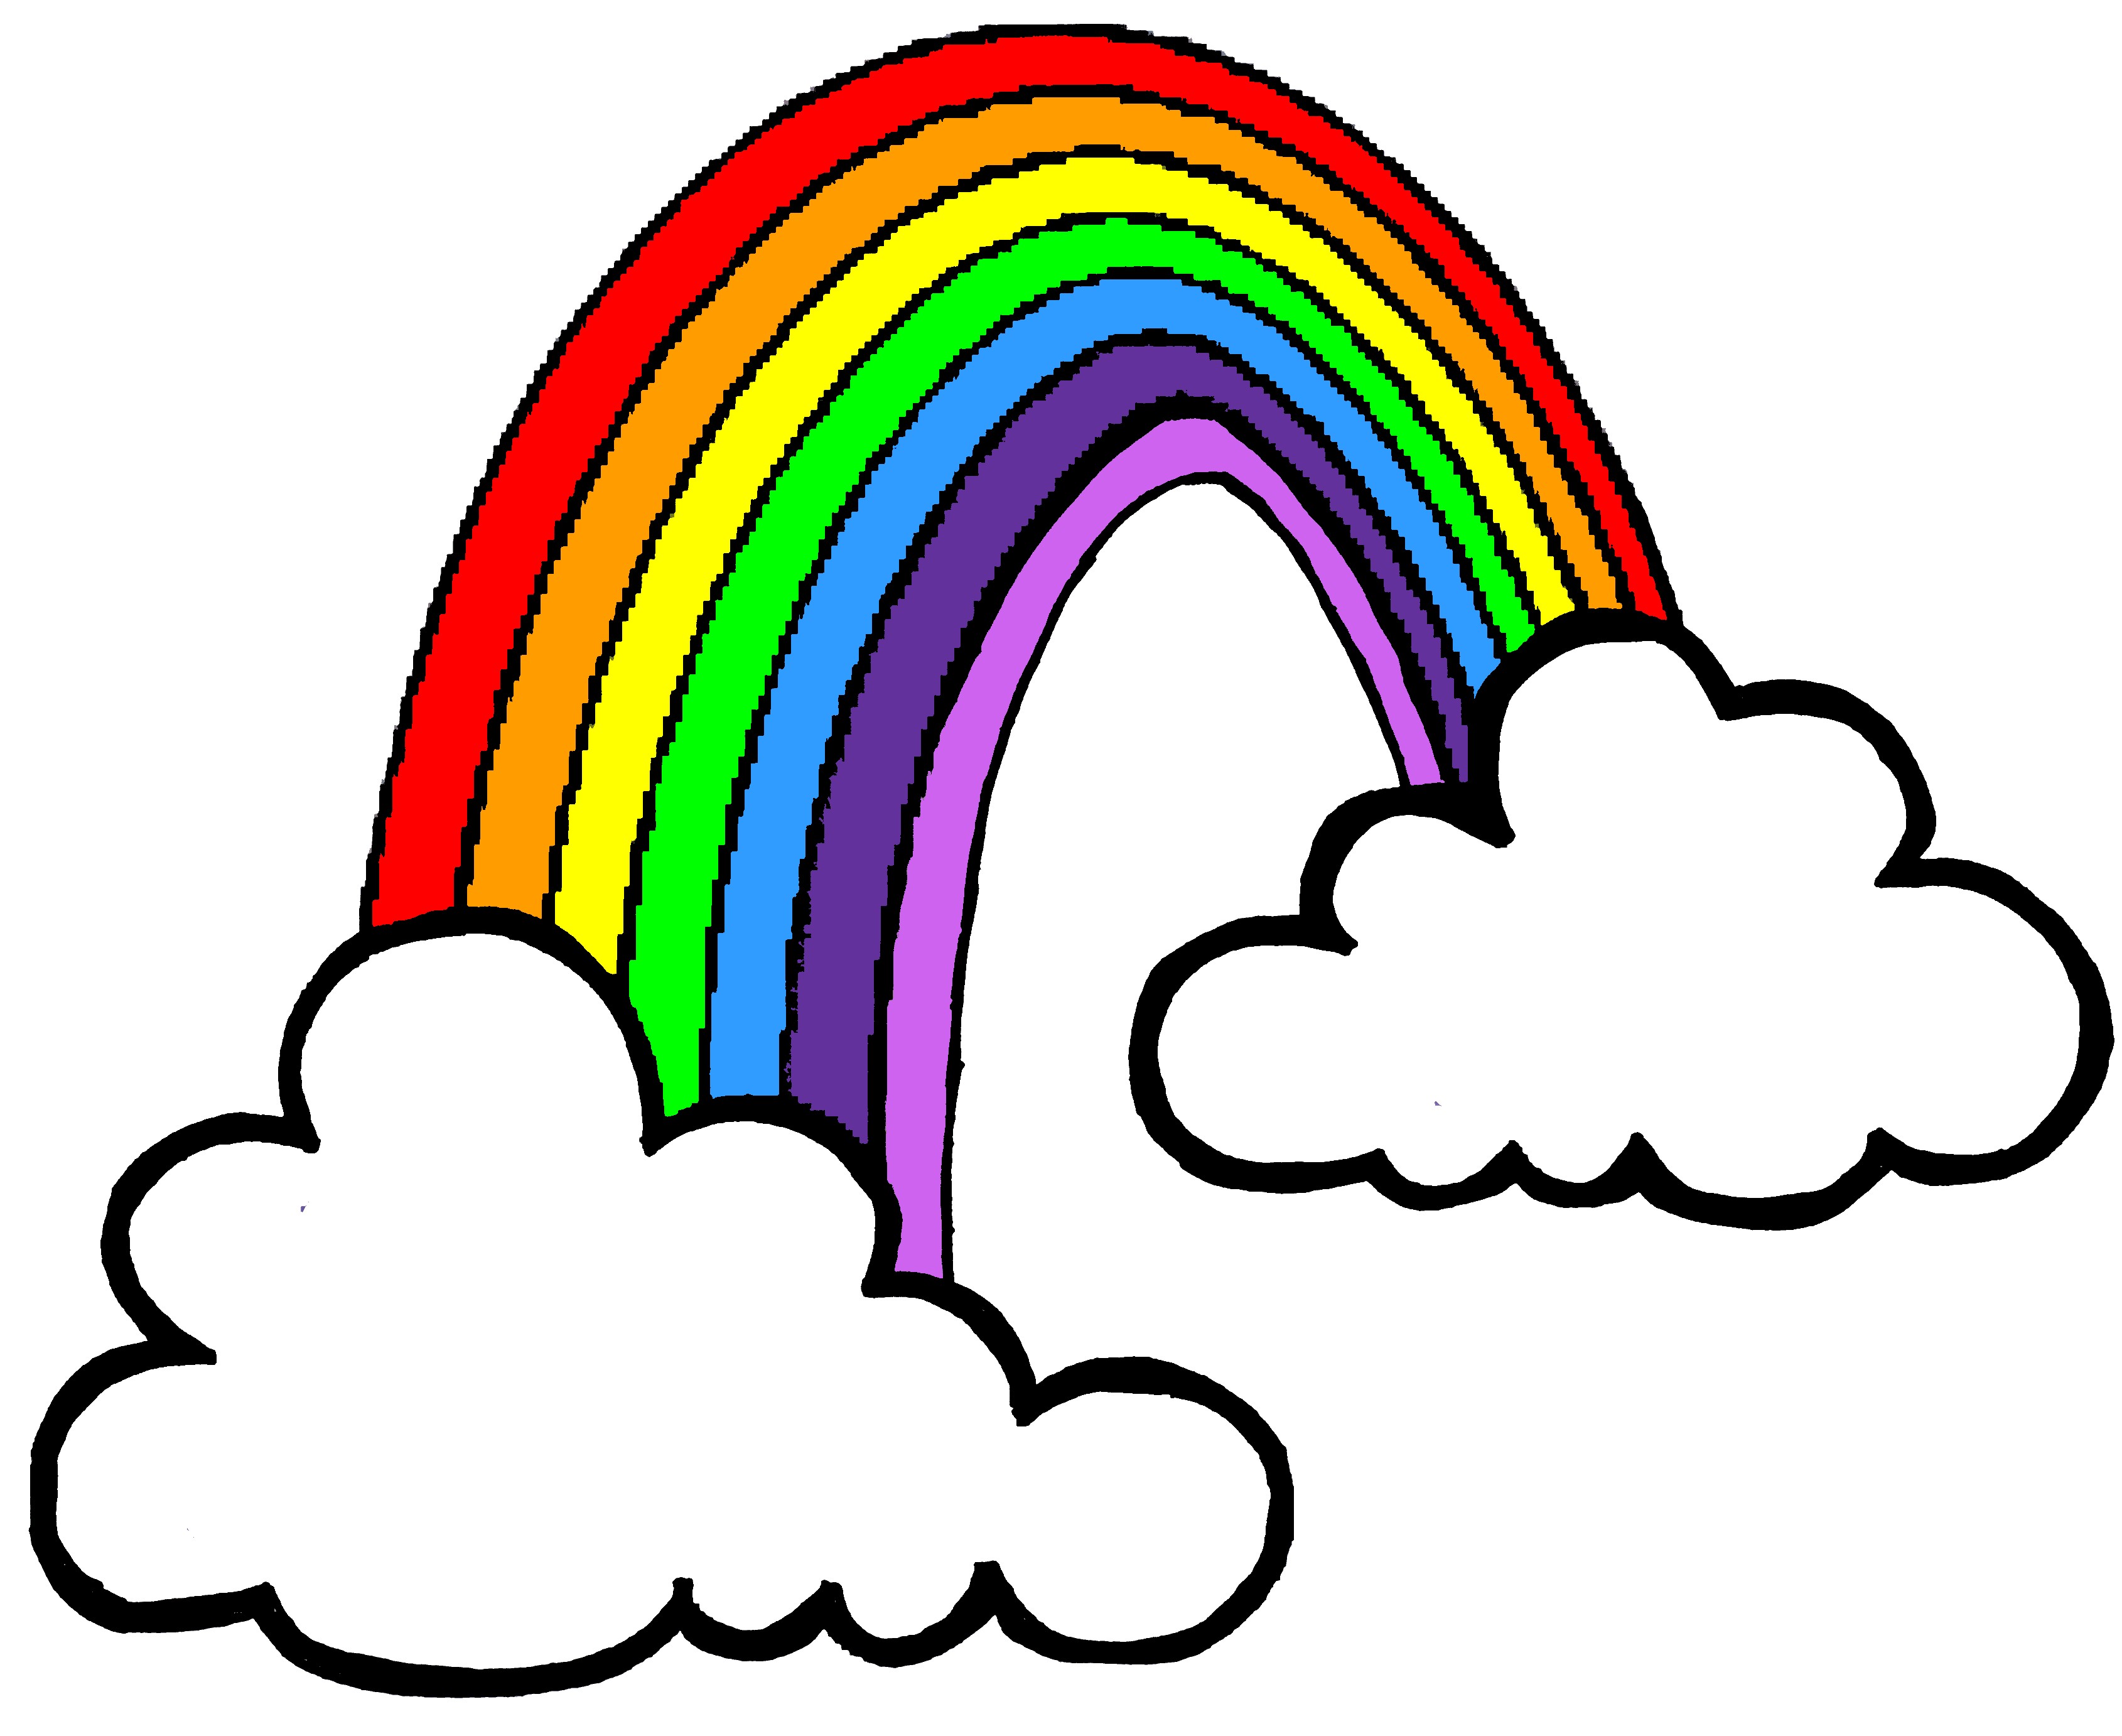 3380x2765 : Rainbow Clipart | Clipart library - Free Clipart Images